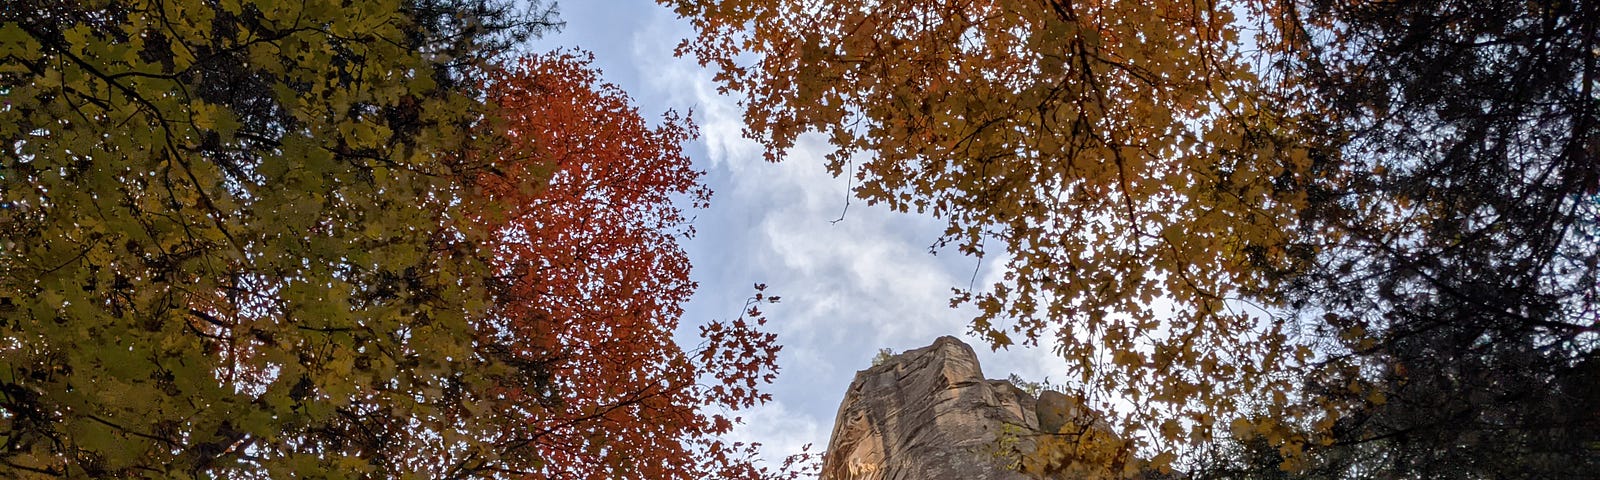 Rock wall surrounded by autumn trees